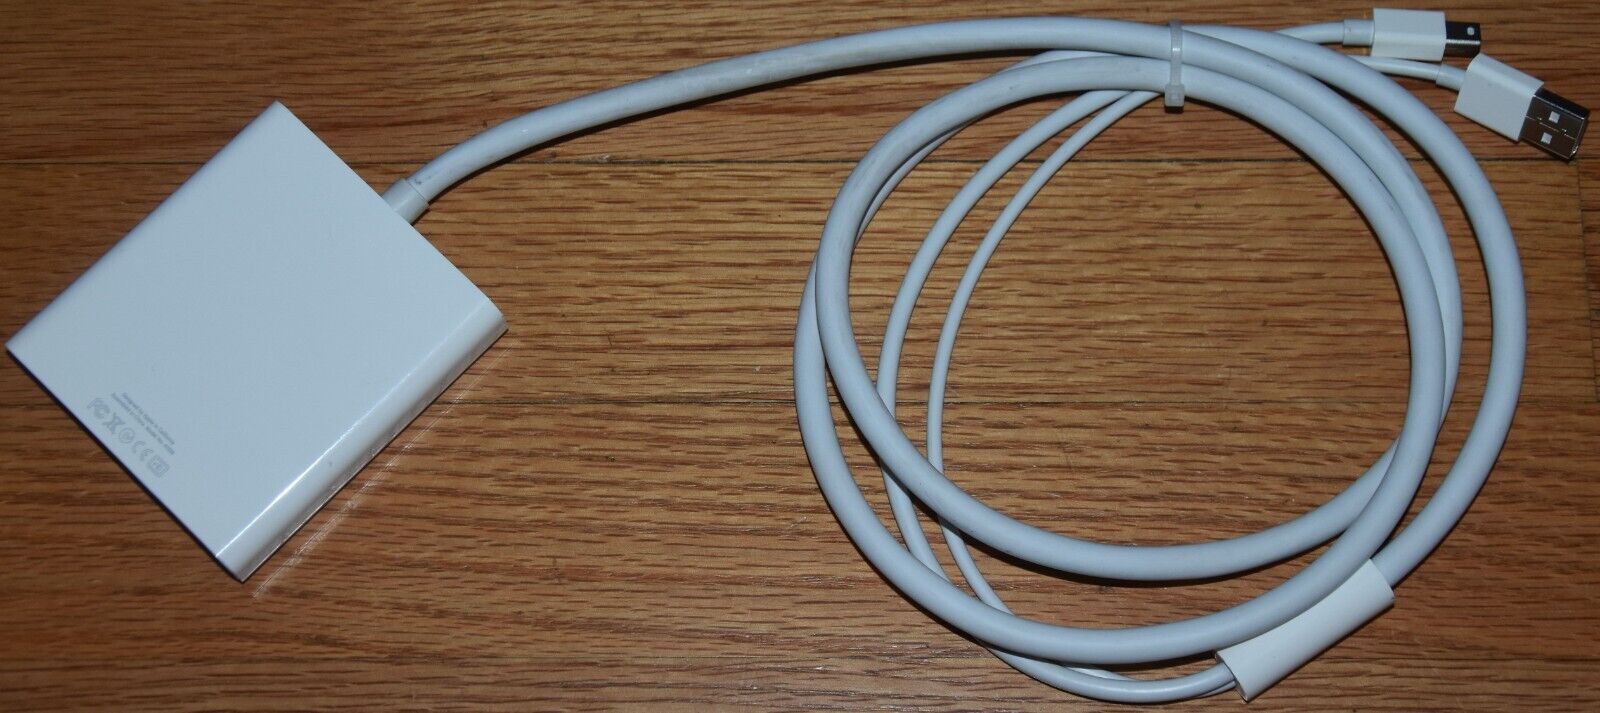 *Genuine OEM* Apple A1306 Mini DisplayPort Dual-Link DVI Adapter Connector Cable